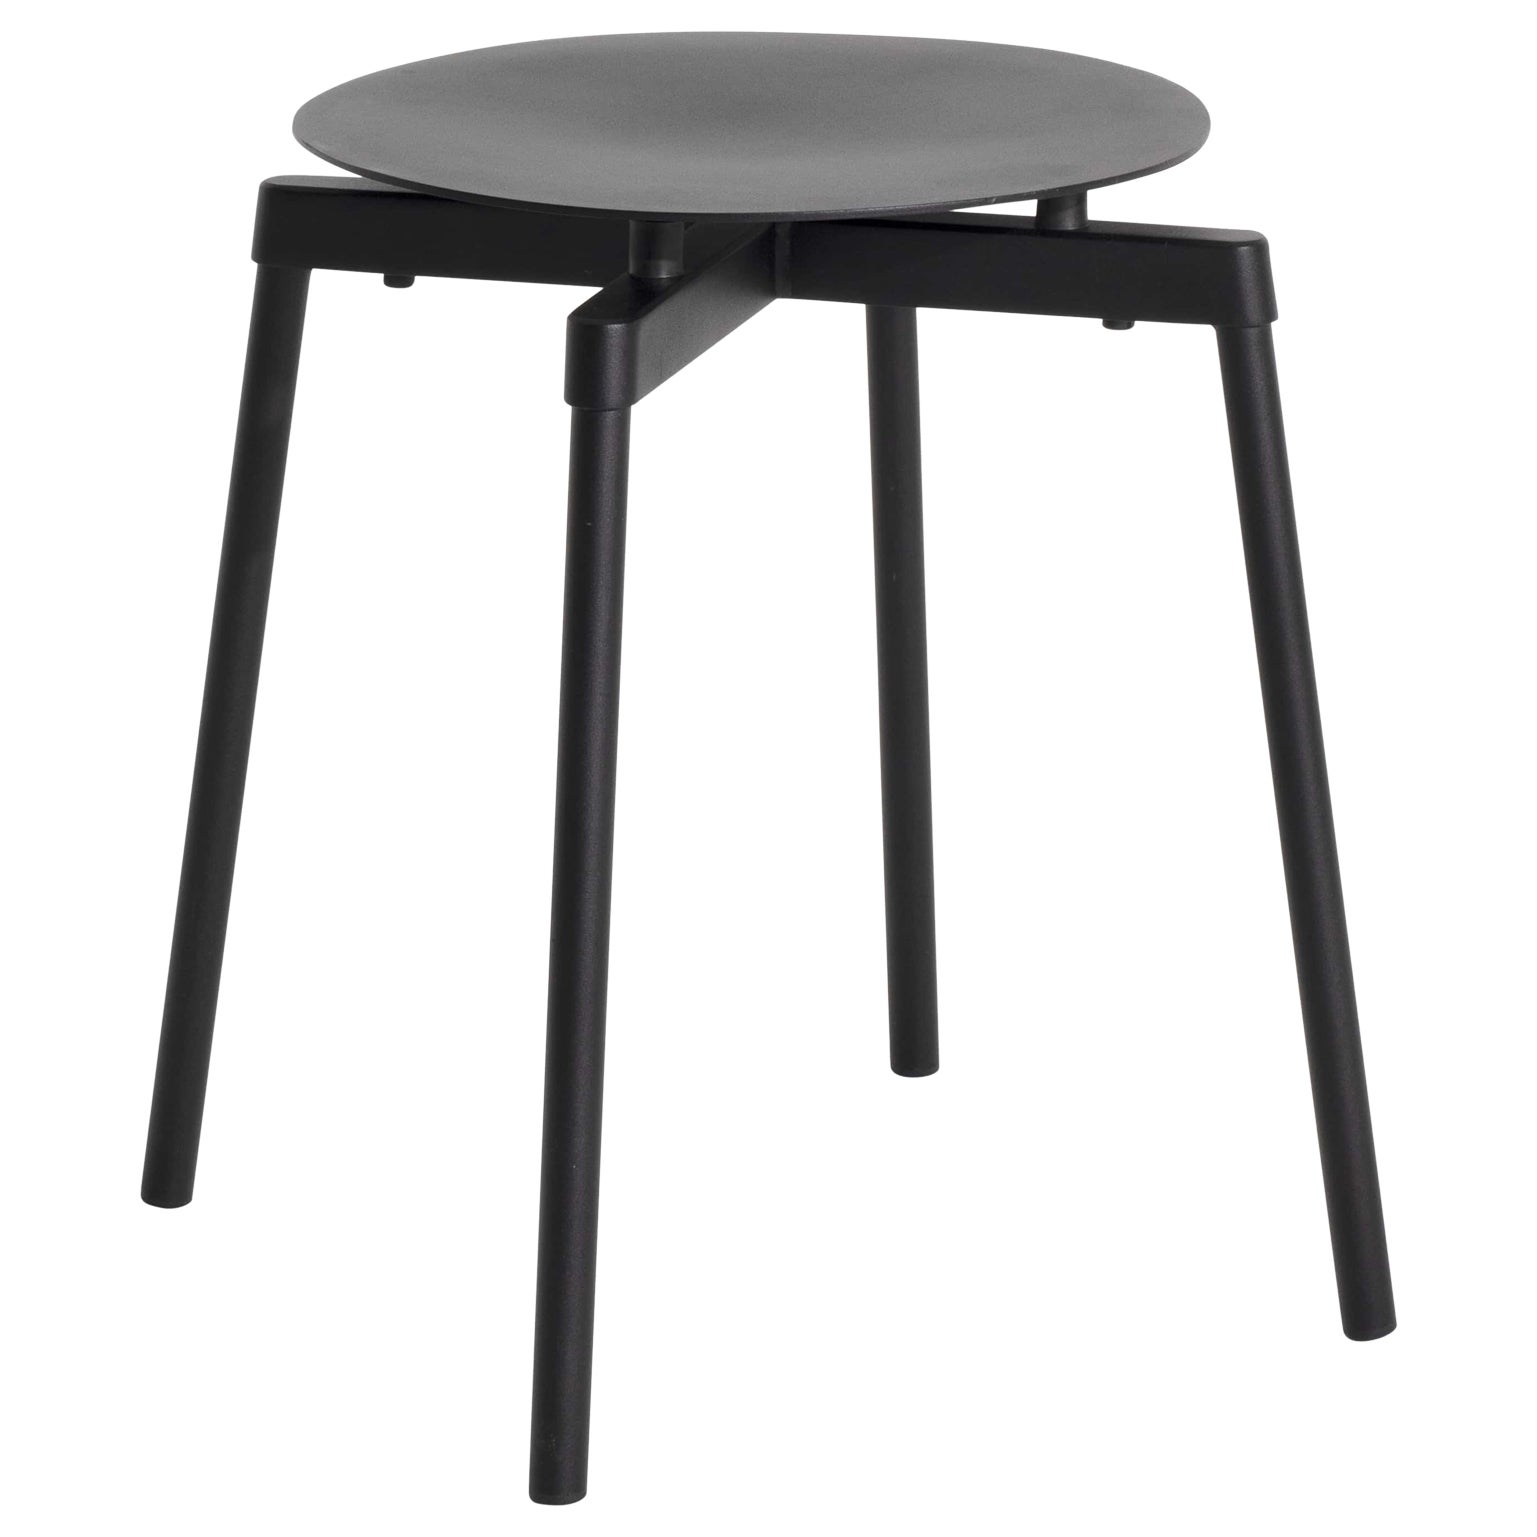 Petite Friture Fromme Stool in Black Aluminium by Tom Chung, 2020 For Sale